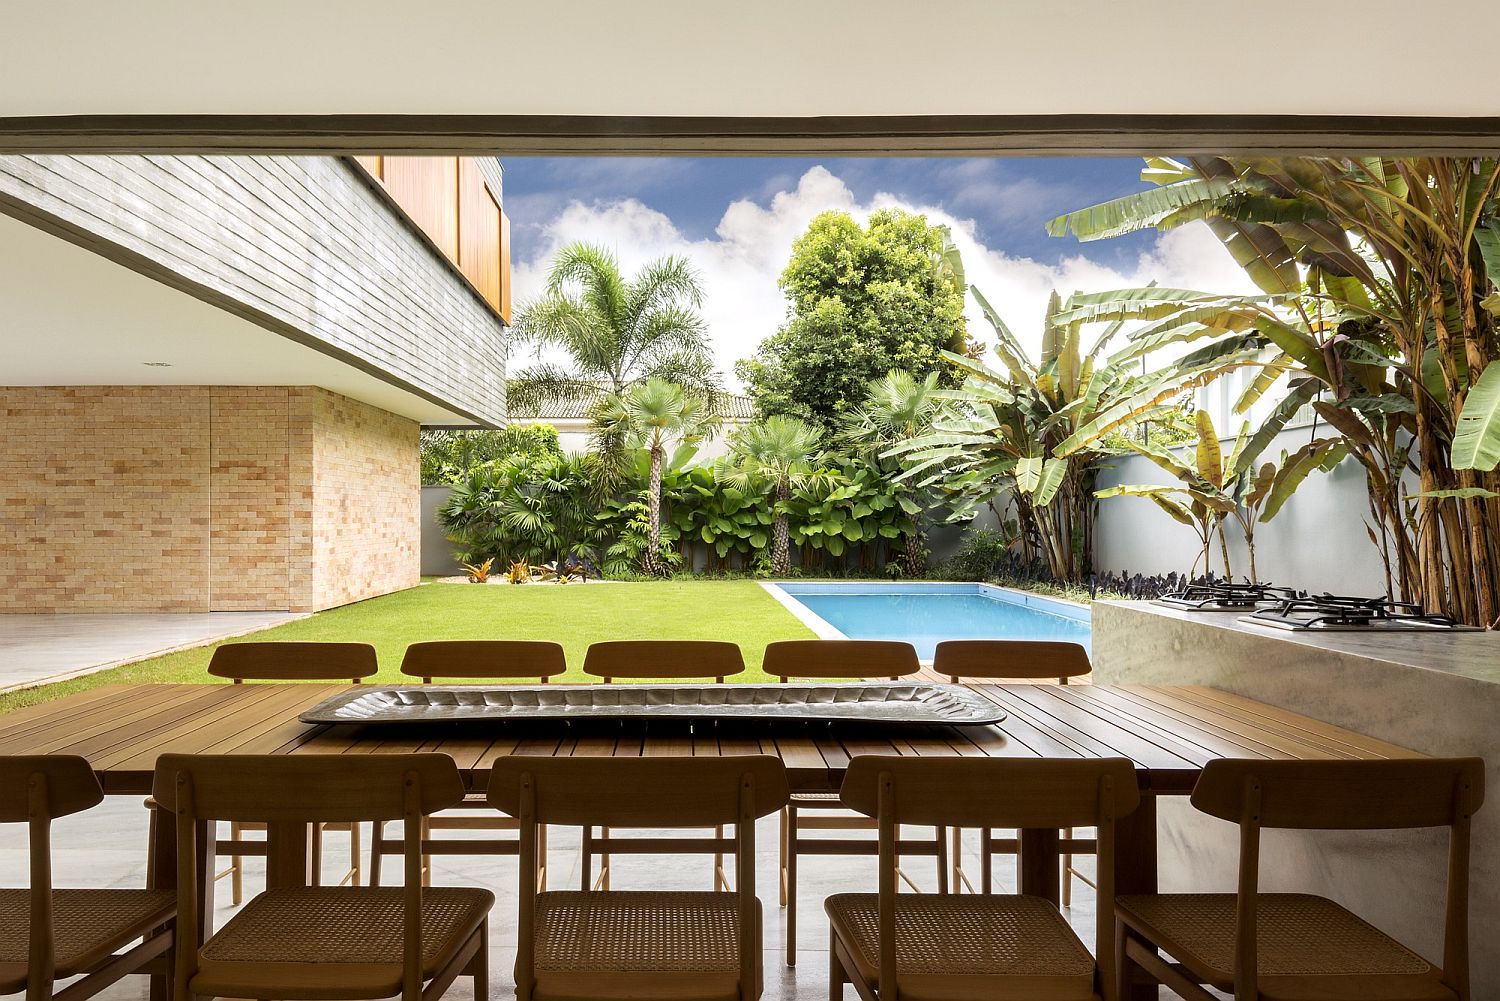 Garden-and-pool-area-of-the-Brazilian-home